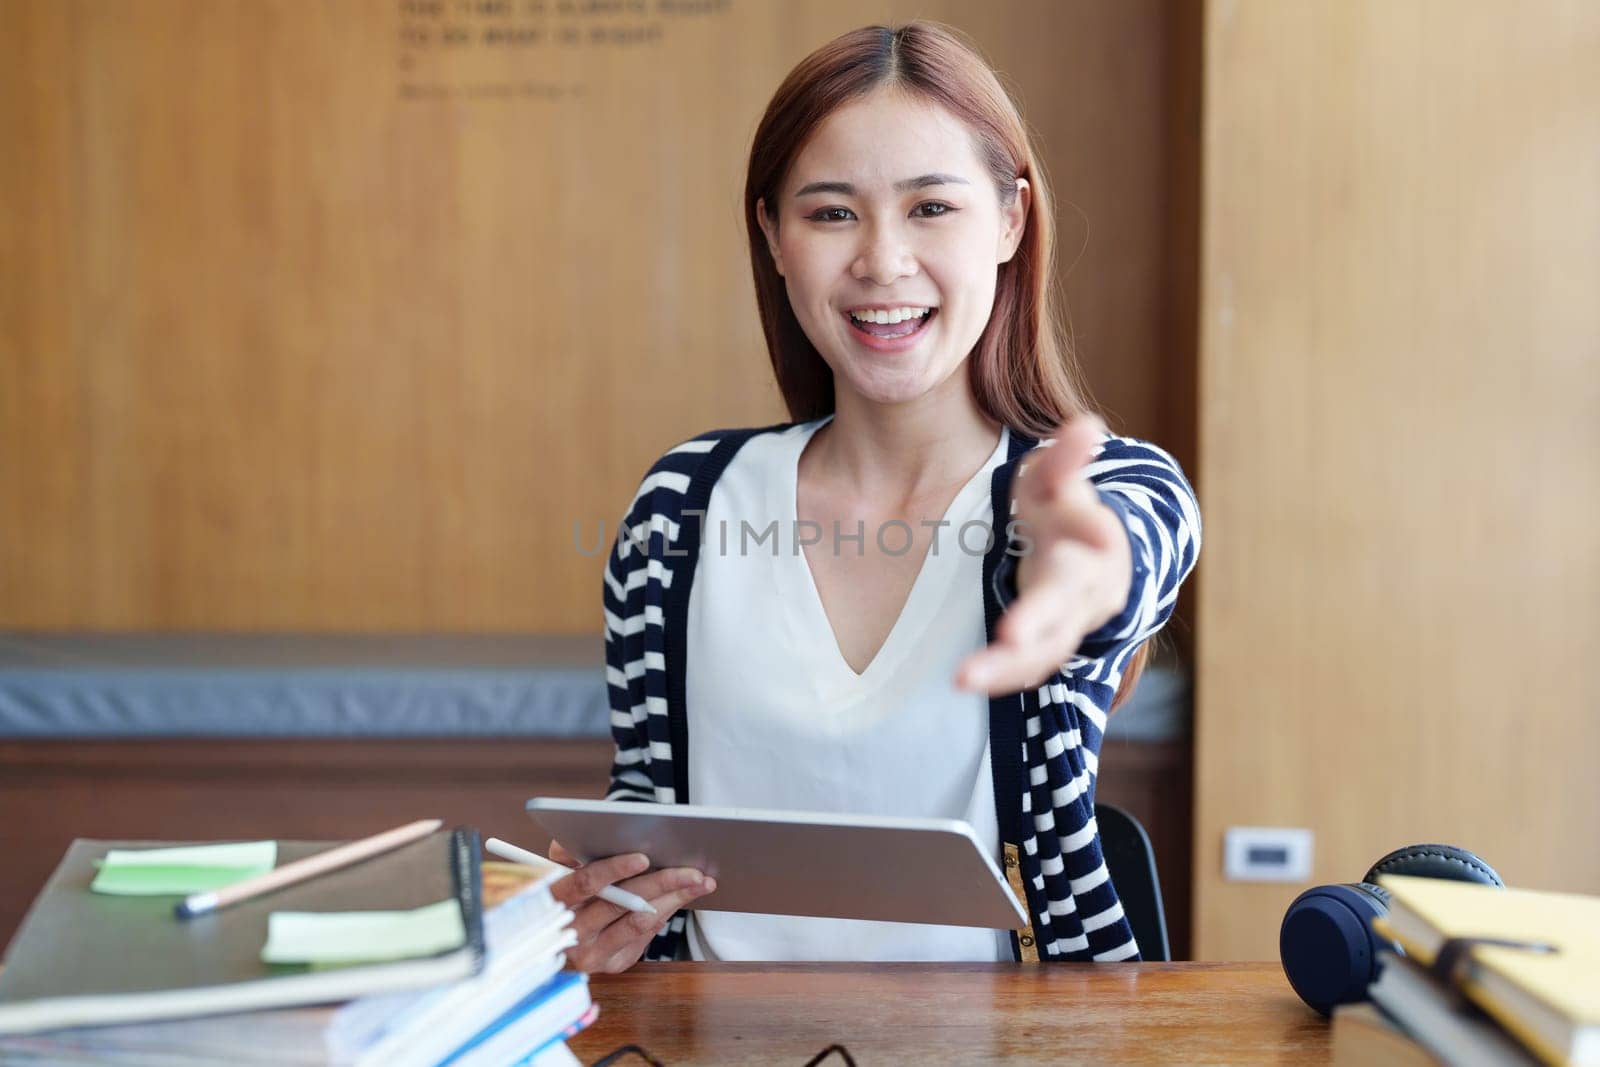 A portrait of a young Asian woman showing a smiling face and gesturing out ideas while using a tablet computer studying online at a library.